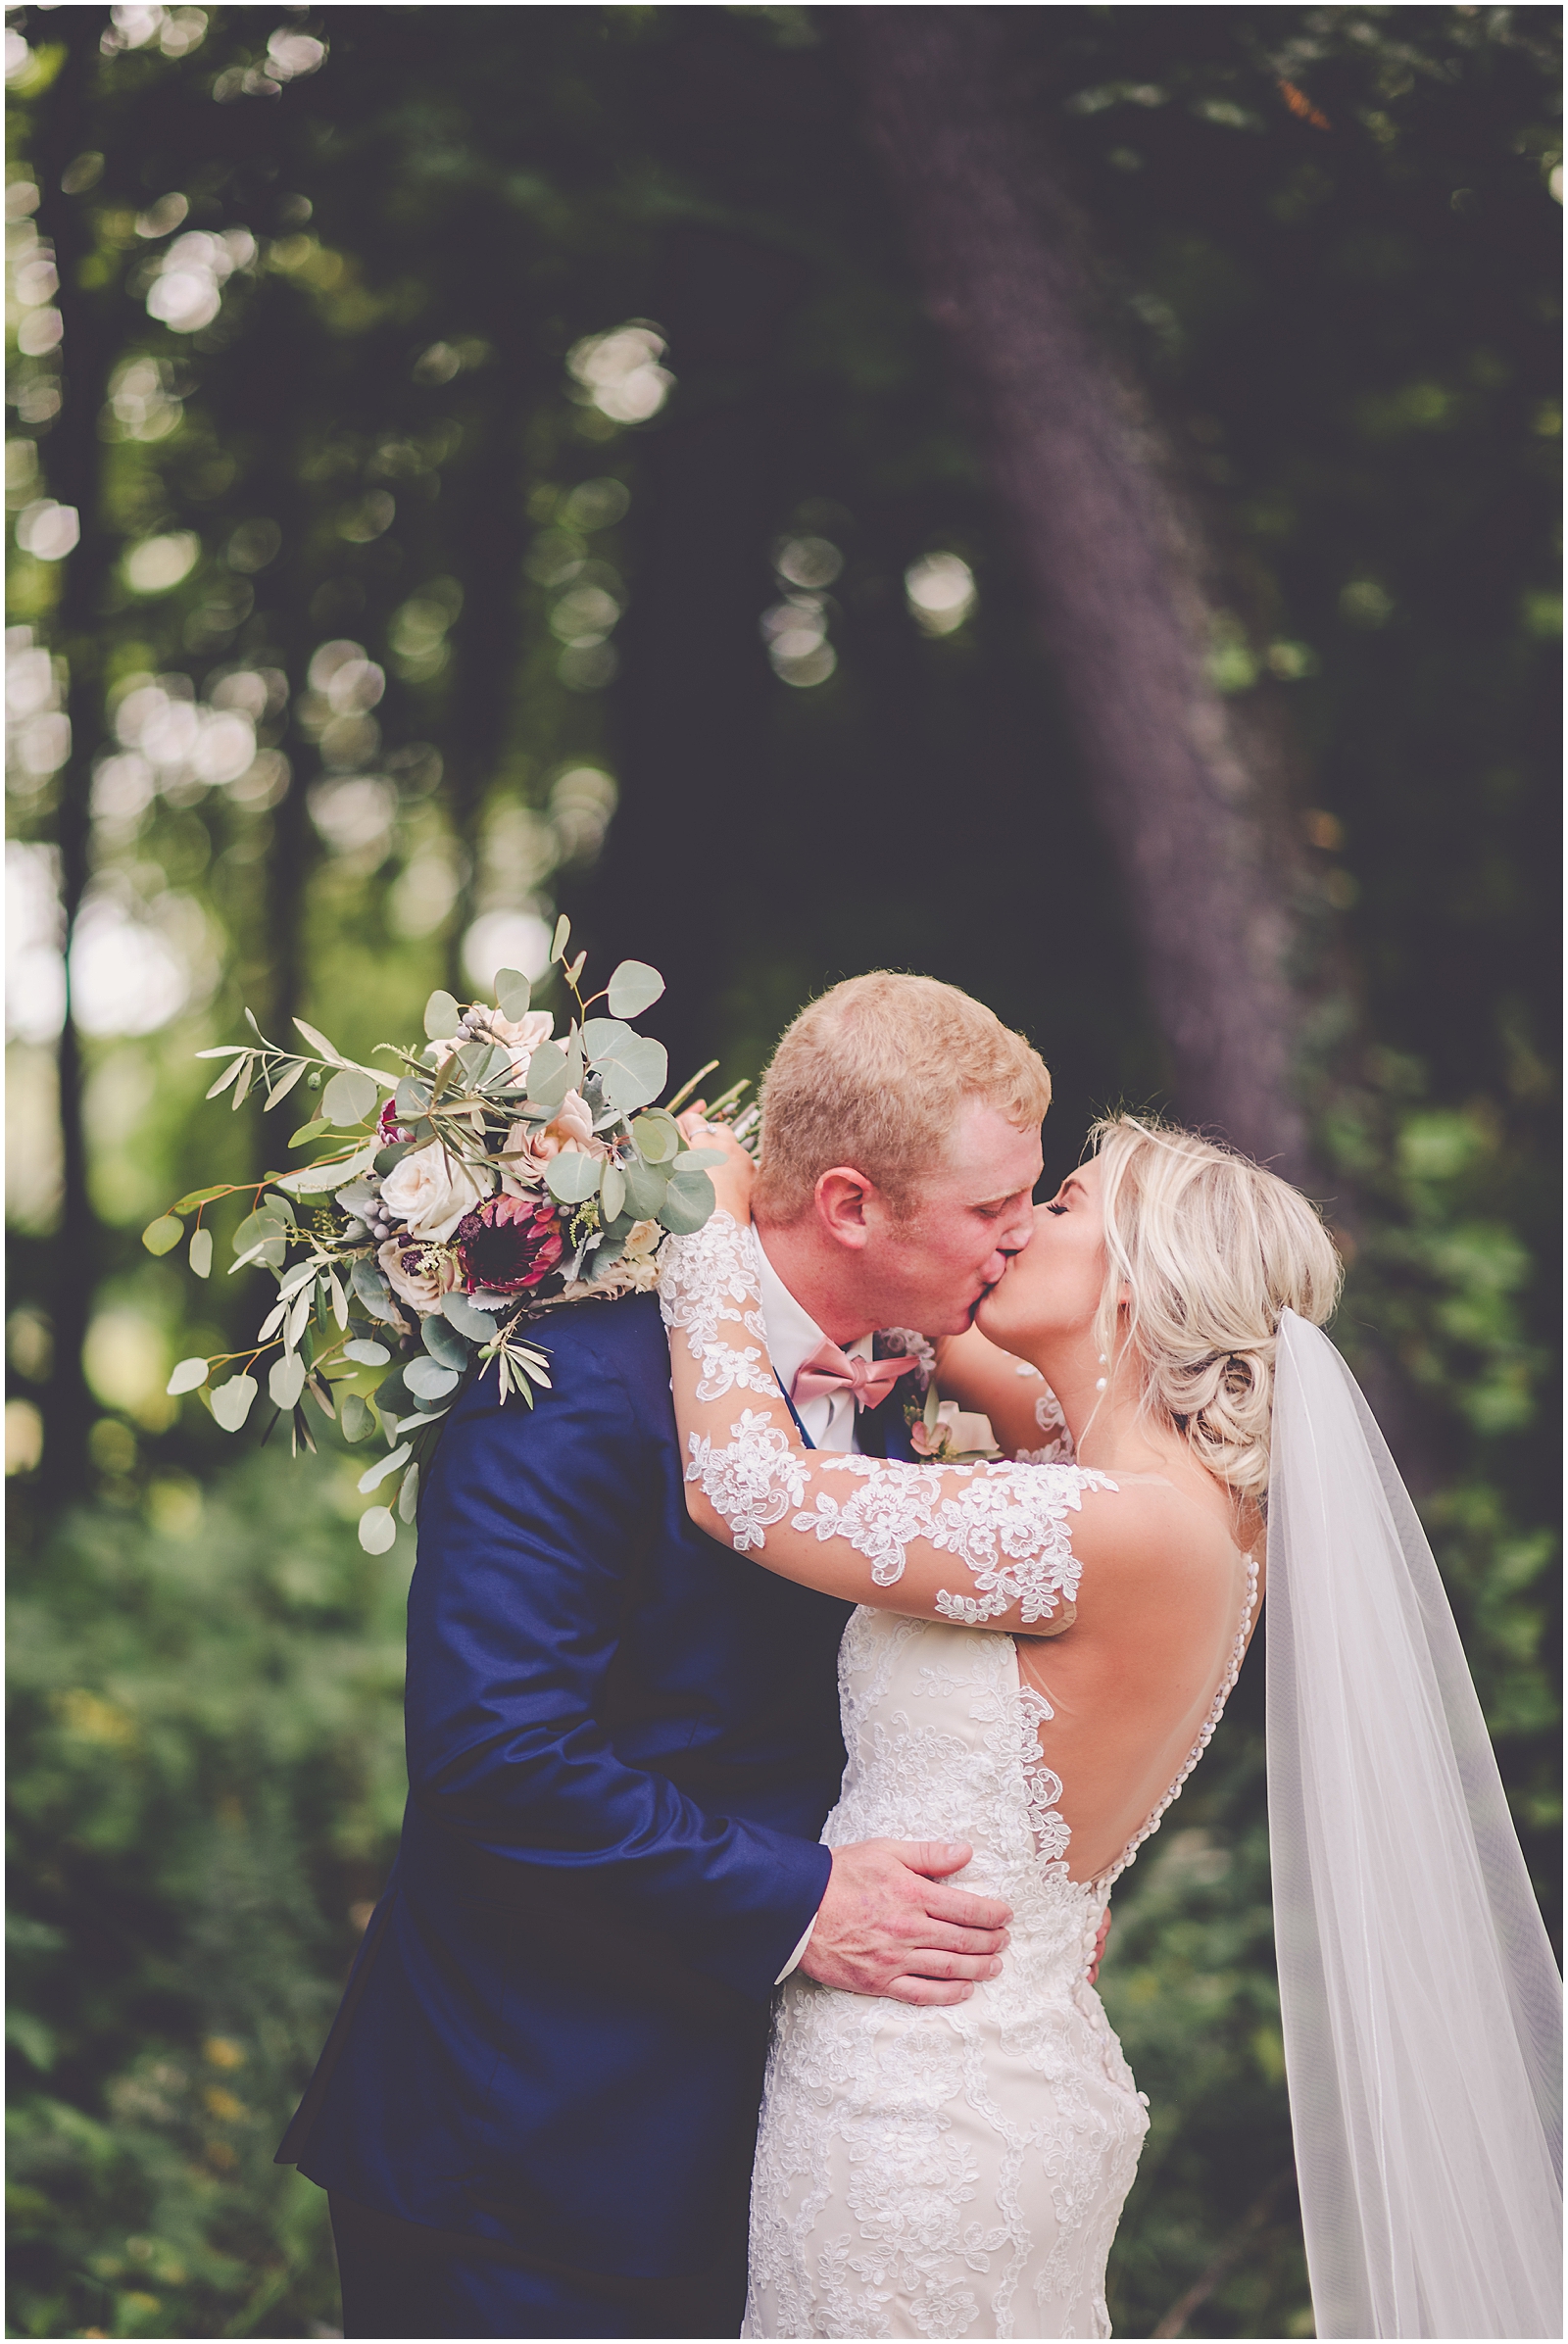 Jennifer and Brett's dusty rose and gold wedding day at The Barn at Hornbaker Gardens with Chicagoland wedding photographer Kara Evans Photographer.